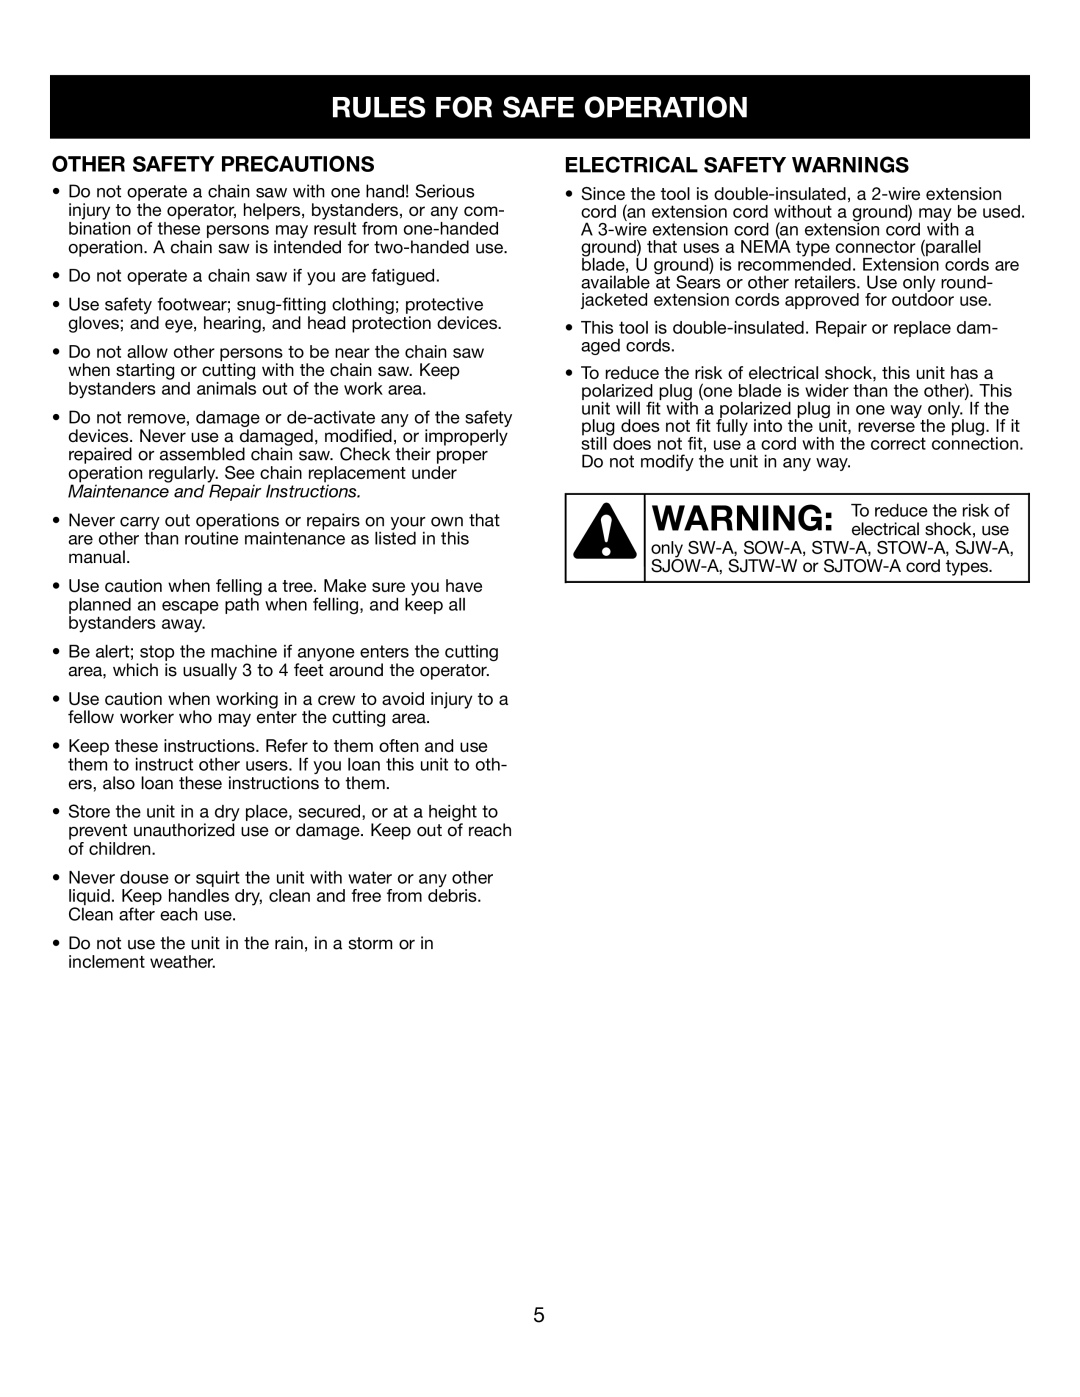 Craftsman 316.34107 manual Other Safety Precautions, Electrical Safety Warnings, Rules For Safe Operation 